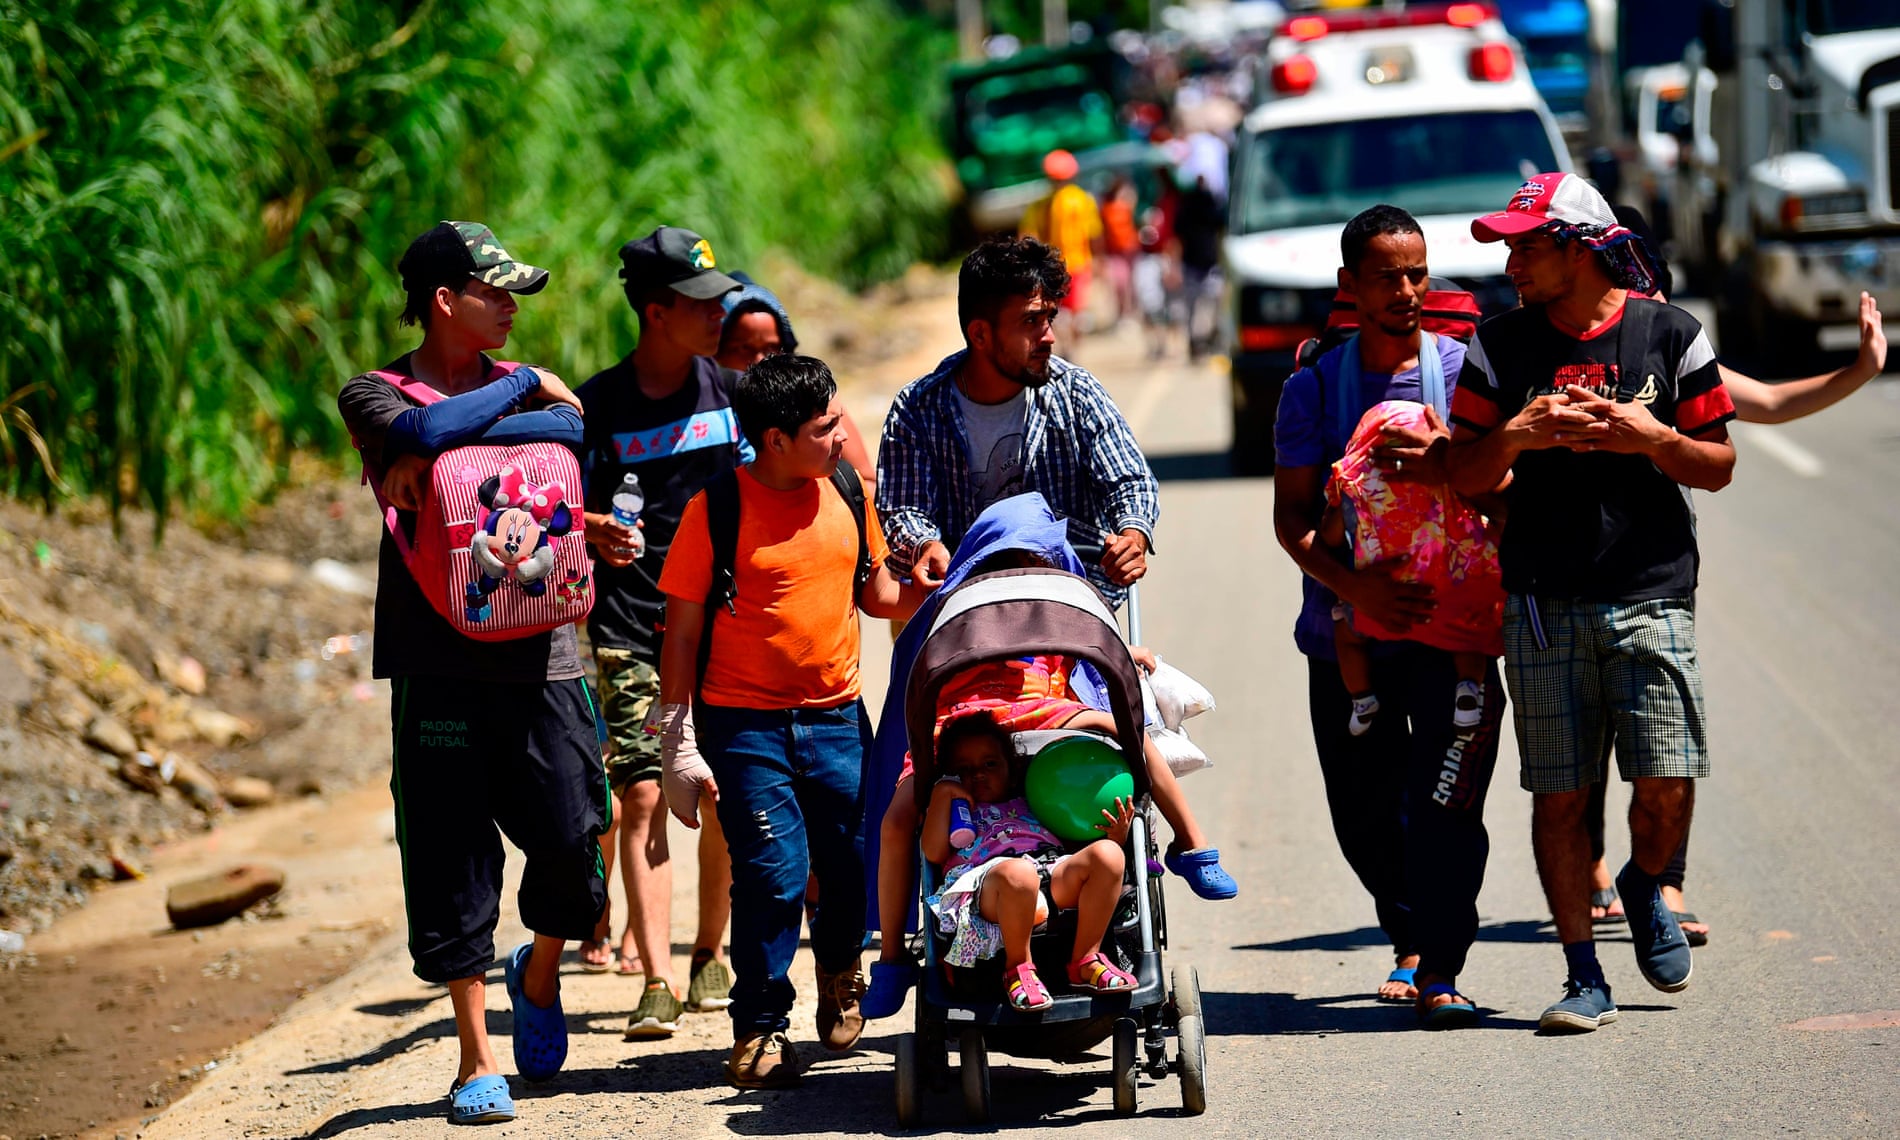 Honduran migrants take part in a caravan heading to the US, in the outskirts of Tapachula, on their way to Huixtla, Chiapas state, Mexico.